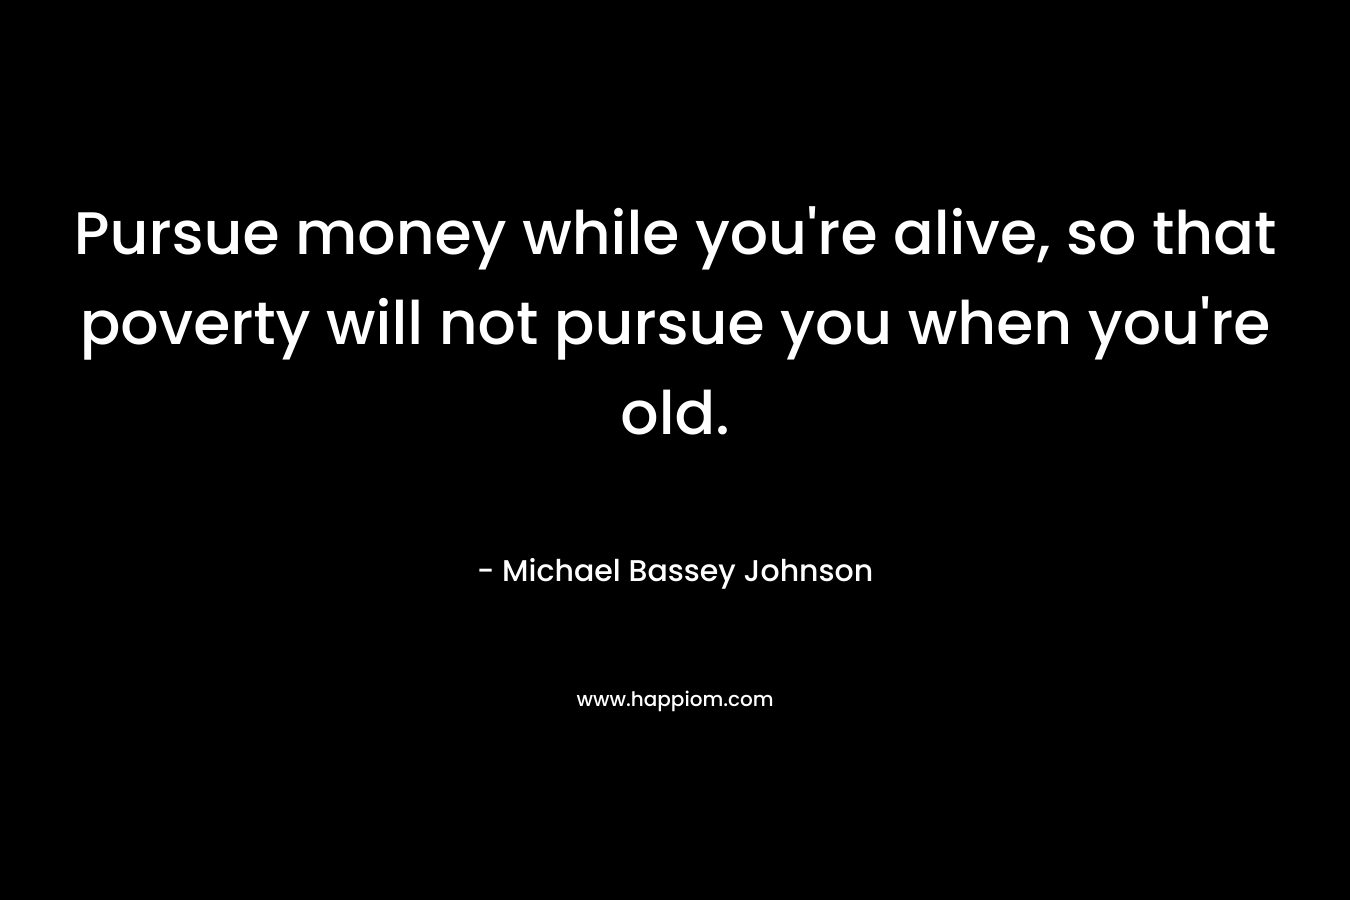 Pursue money while you're alive, so that poverty will not pursue you when you're old.